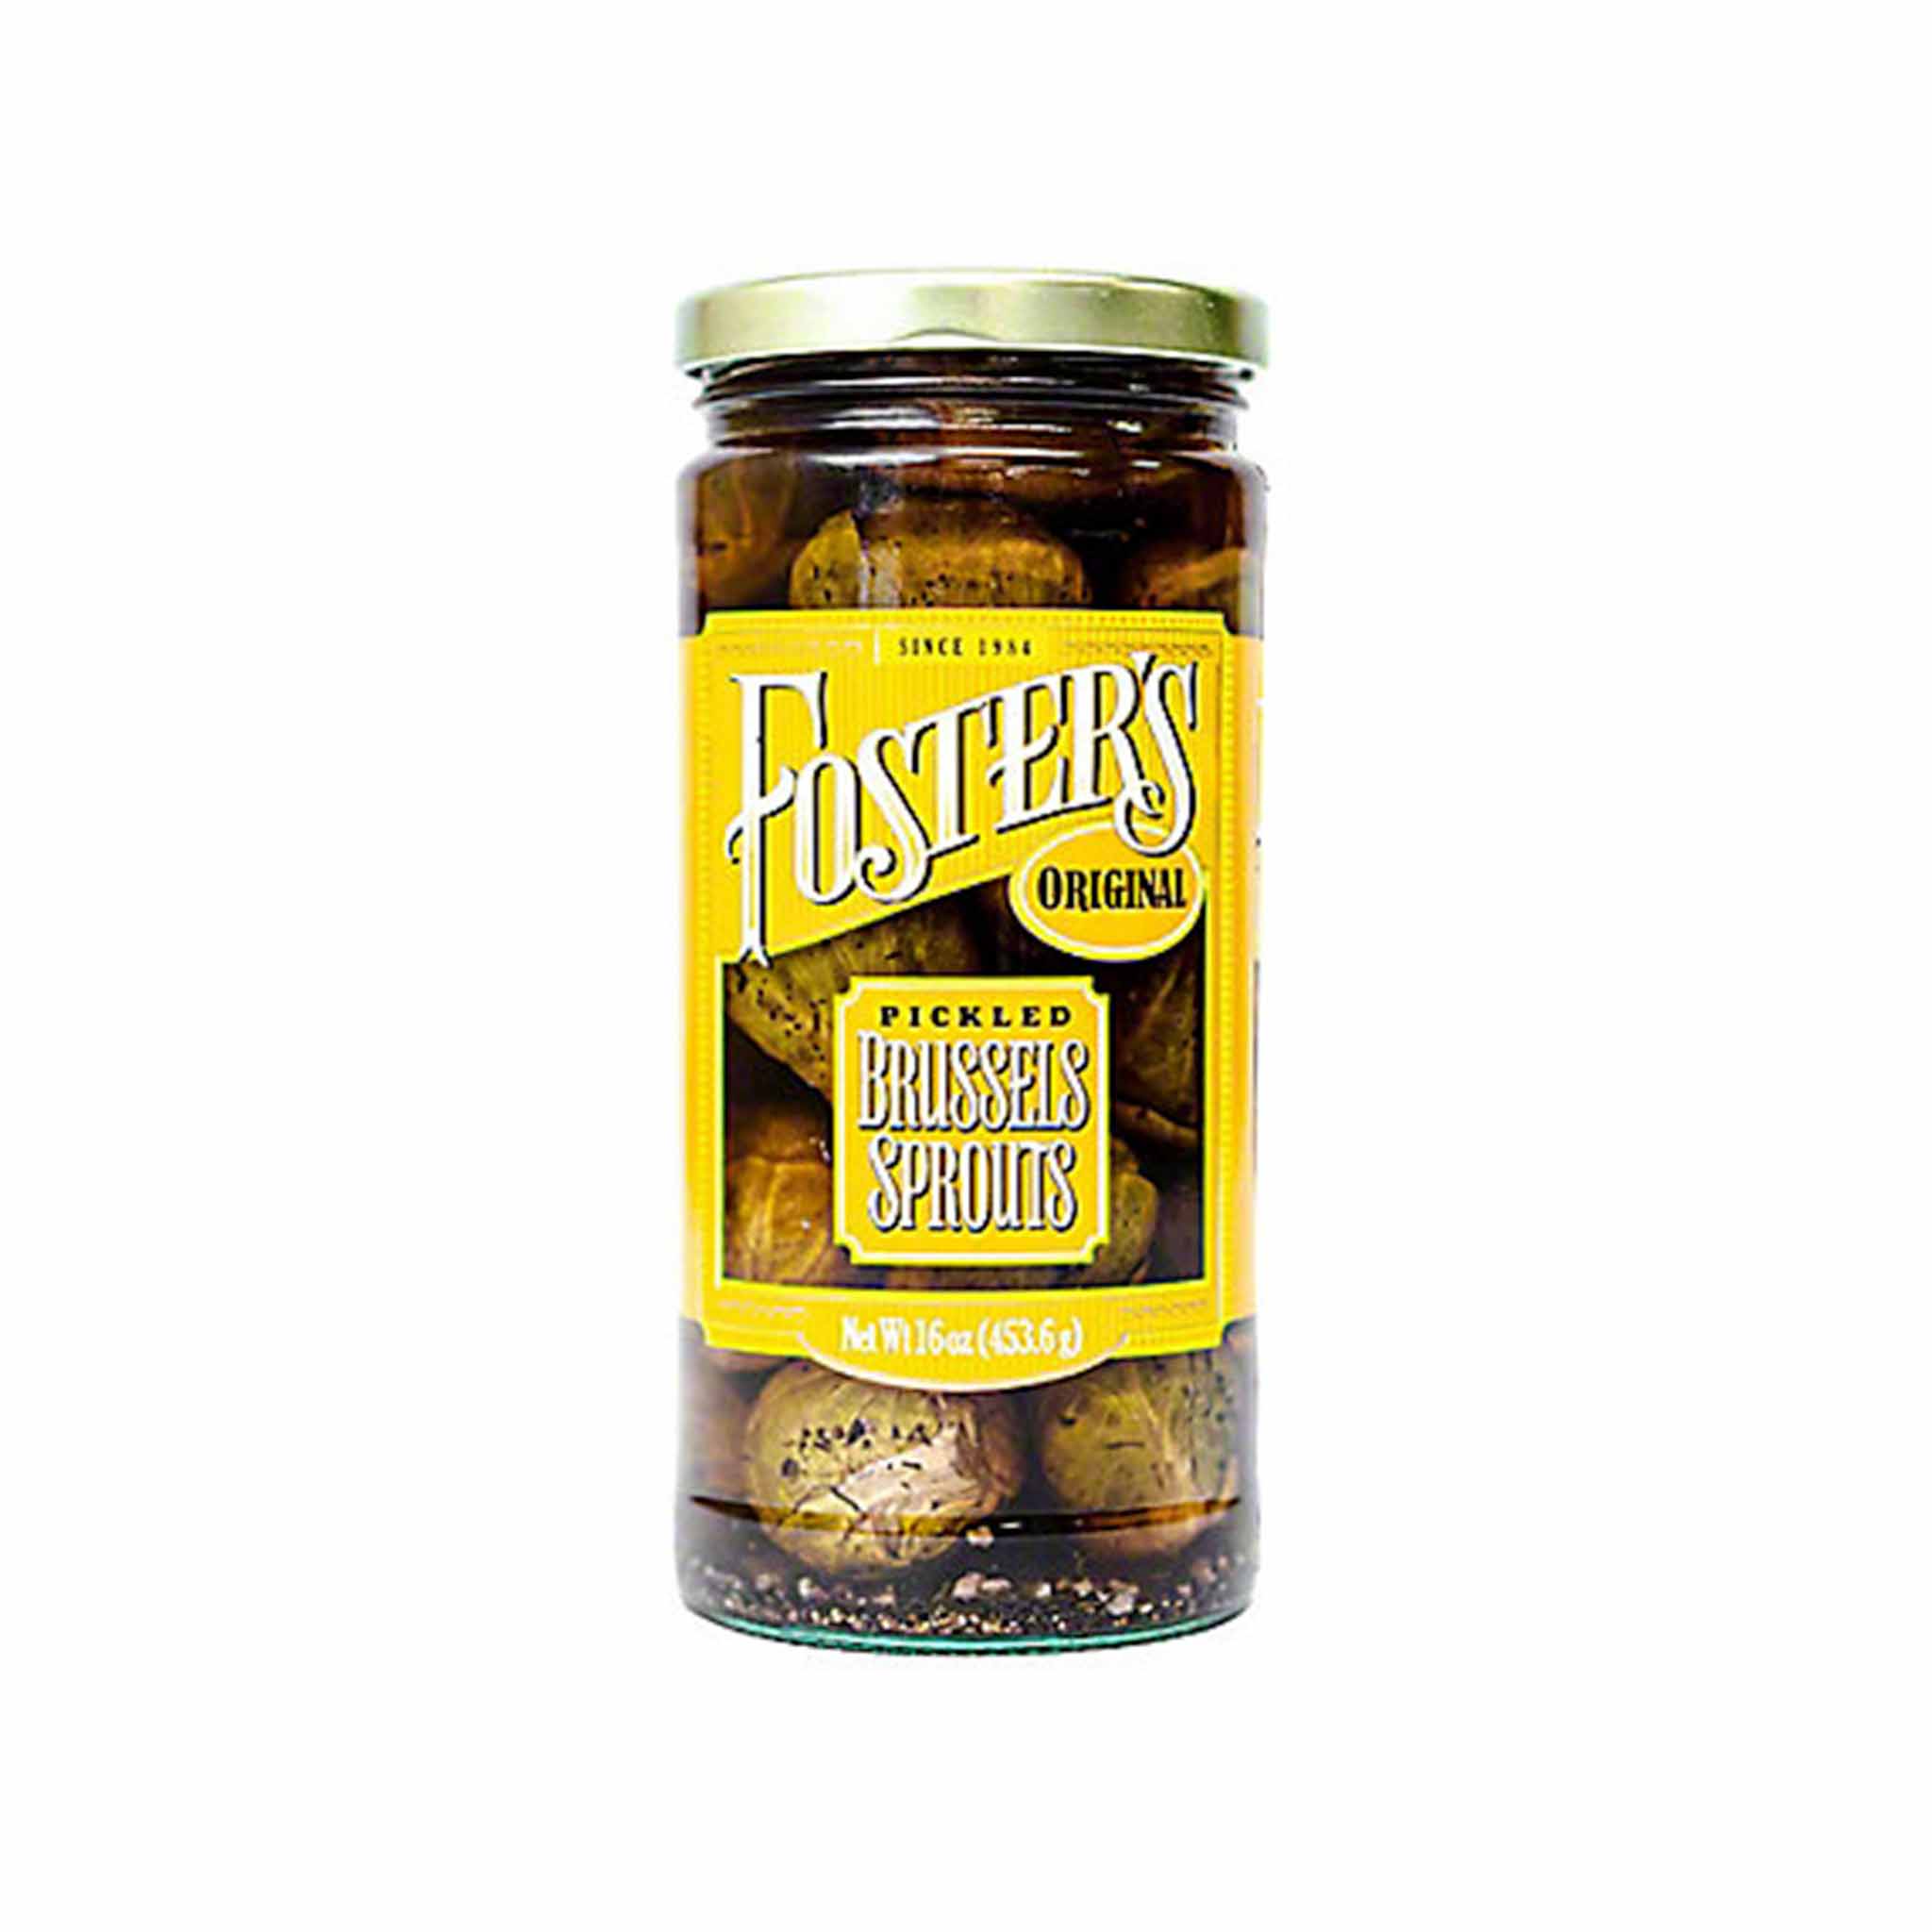 FOSTERS PICKLED BRUSSELS SPROUTS 16oz